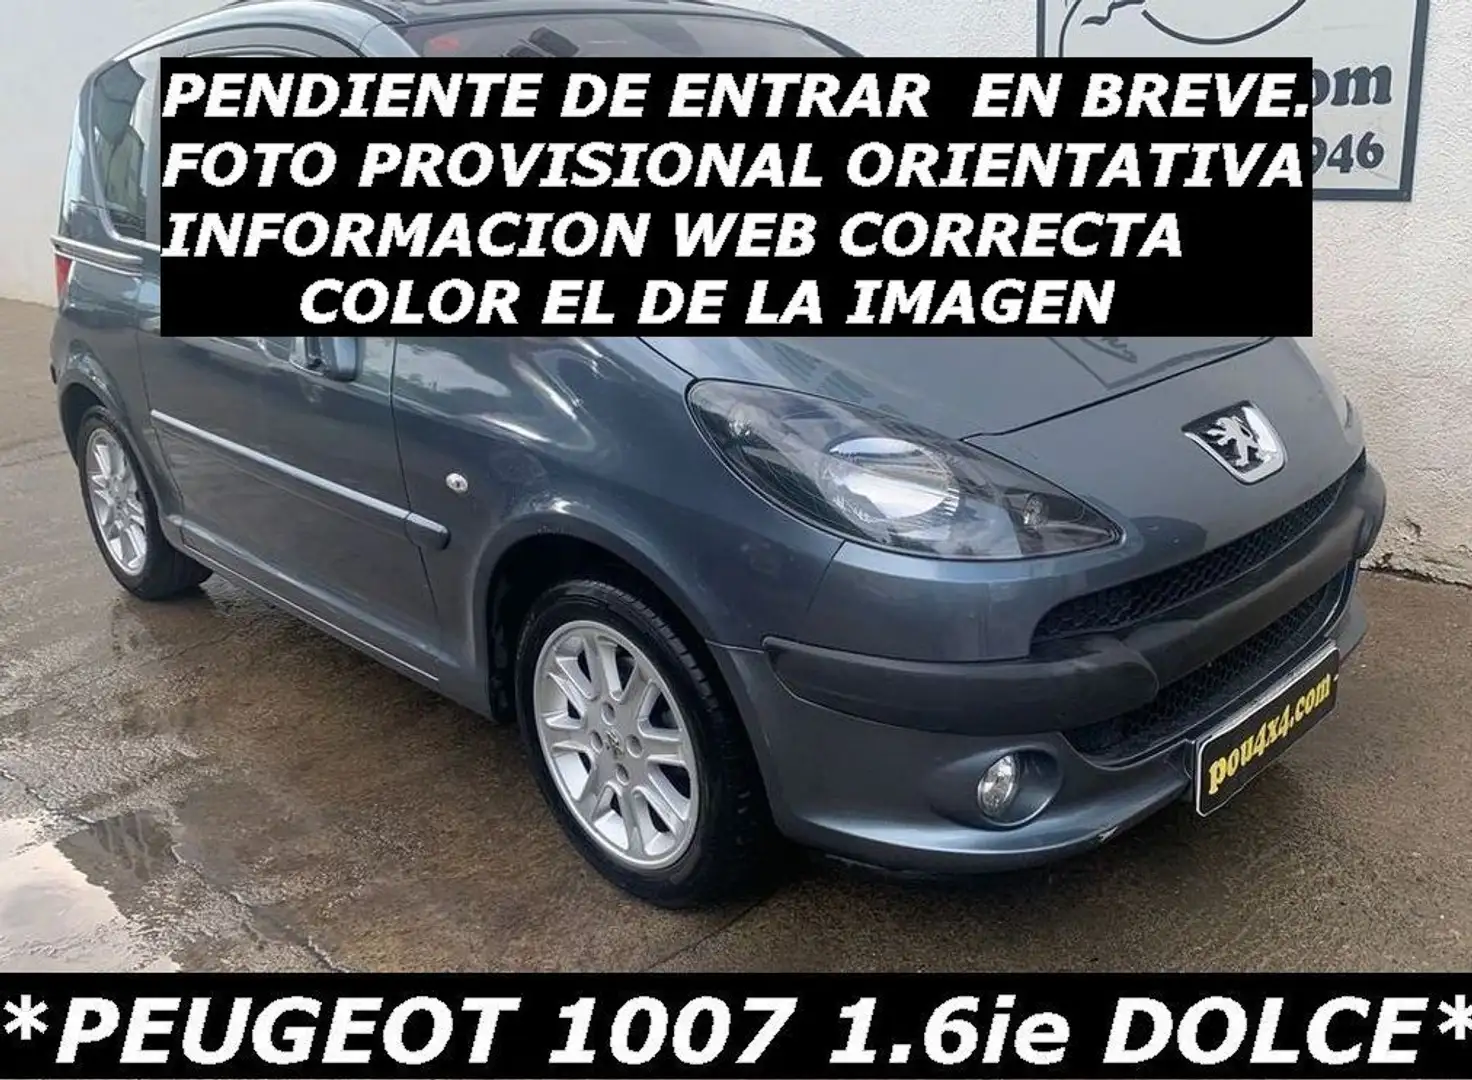 Peugeot 1007 1.6 Dolce 2 Tronic siva - 1